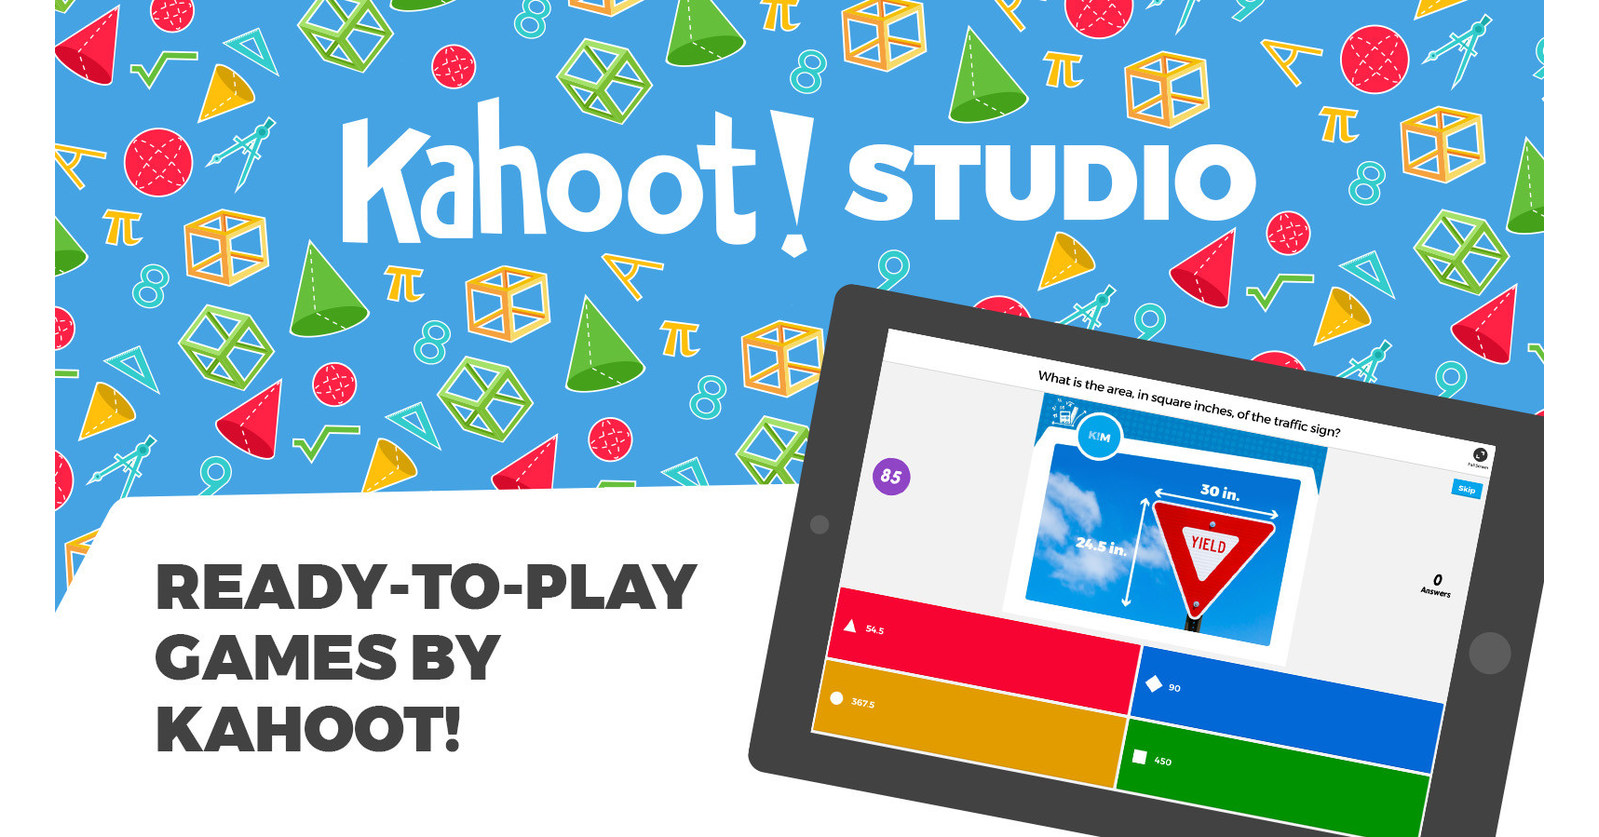 Kahoot! launches Kahoot! Studio to offer ready-to-play original learning  games spanning education and entertainment